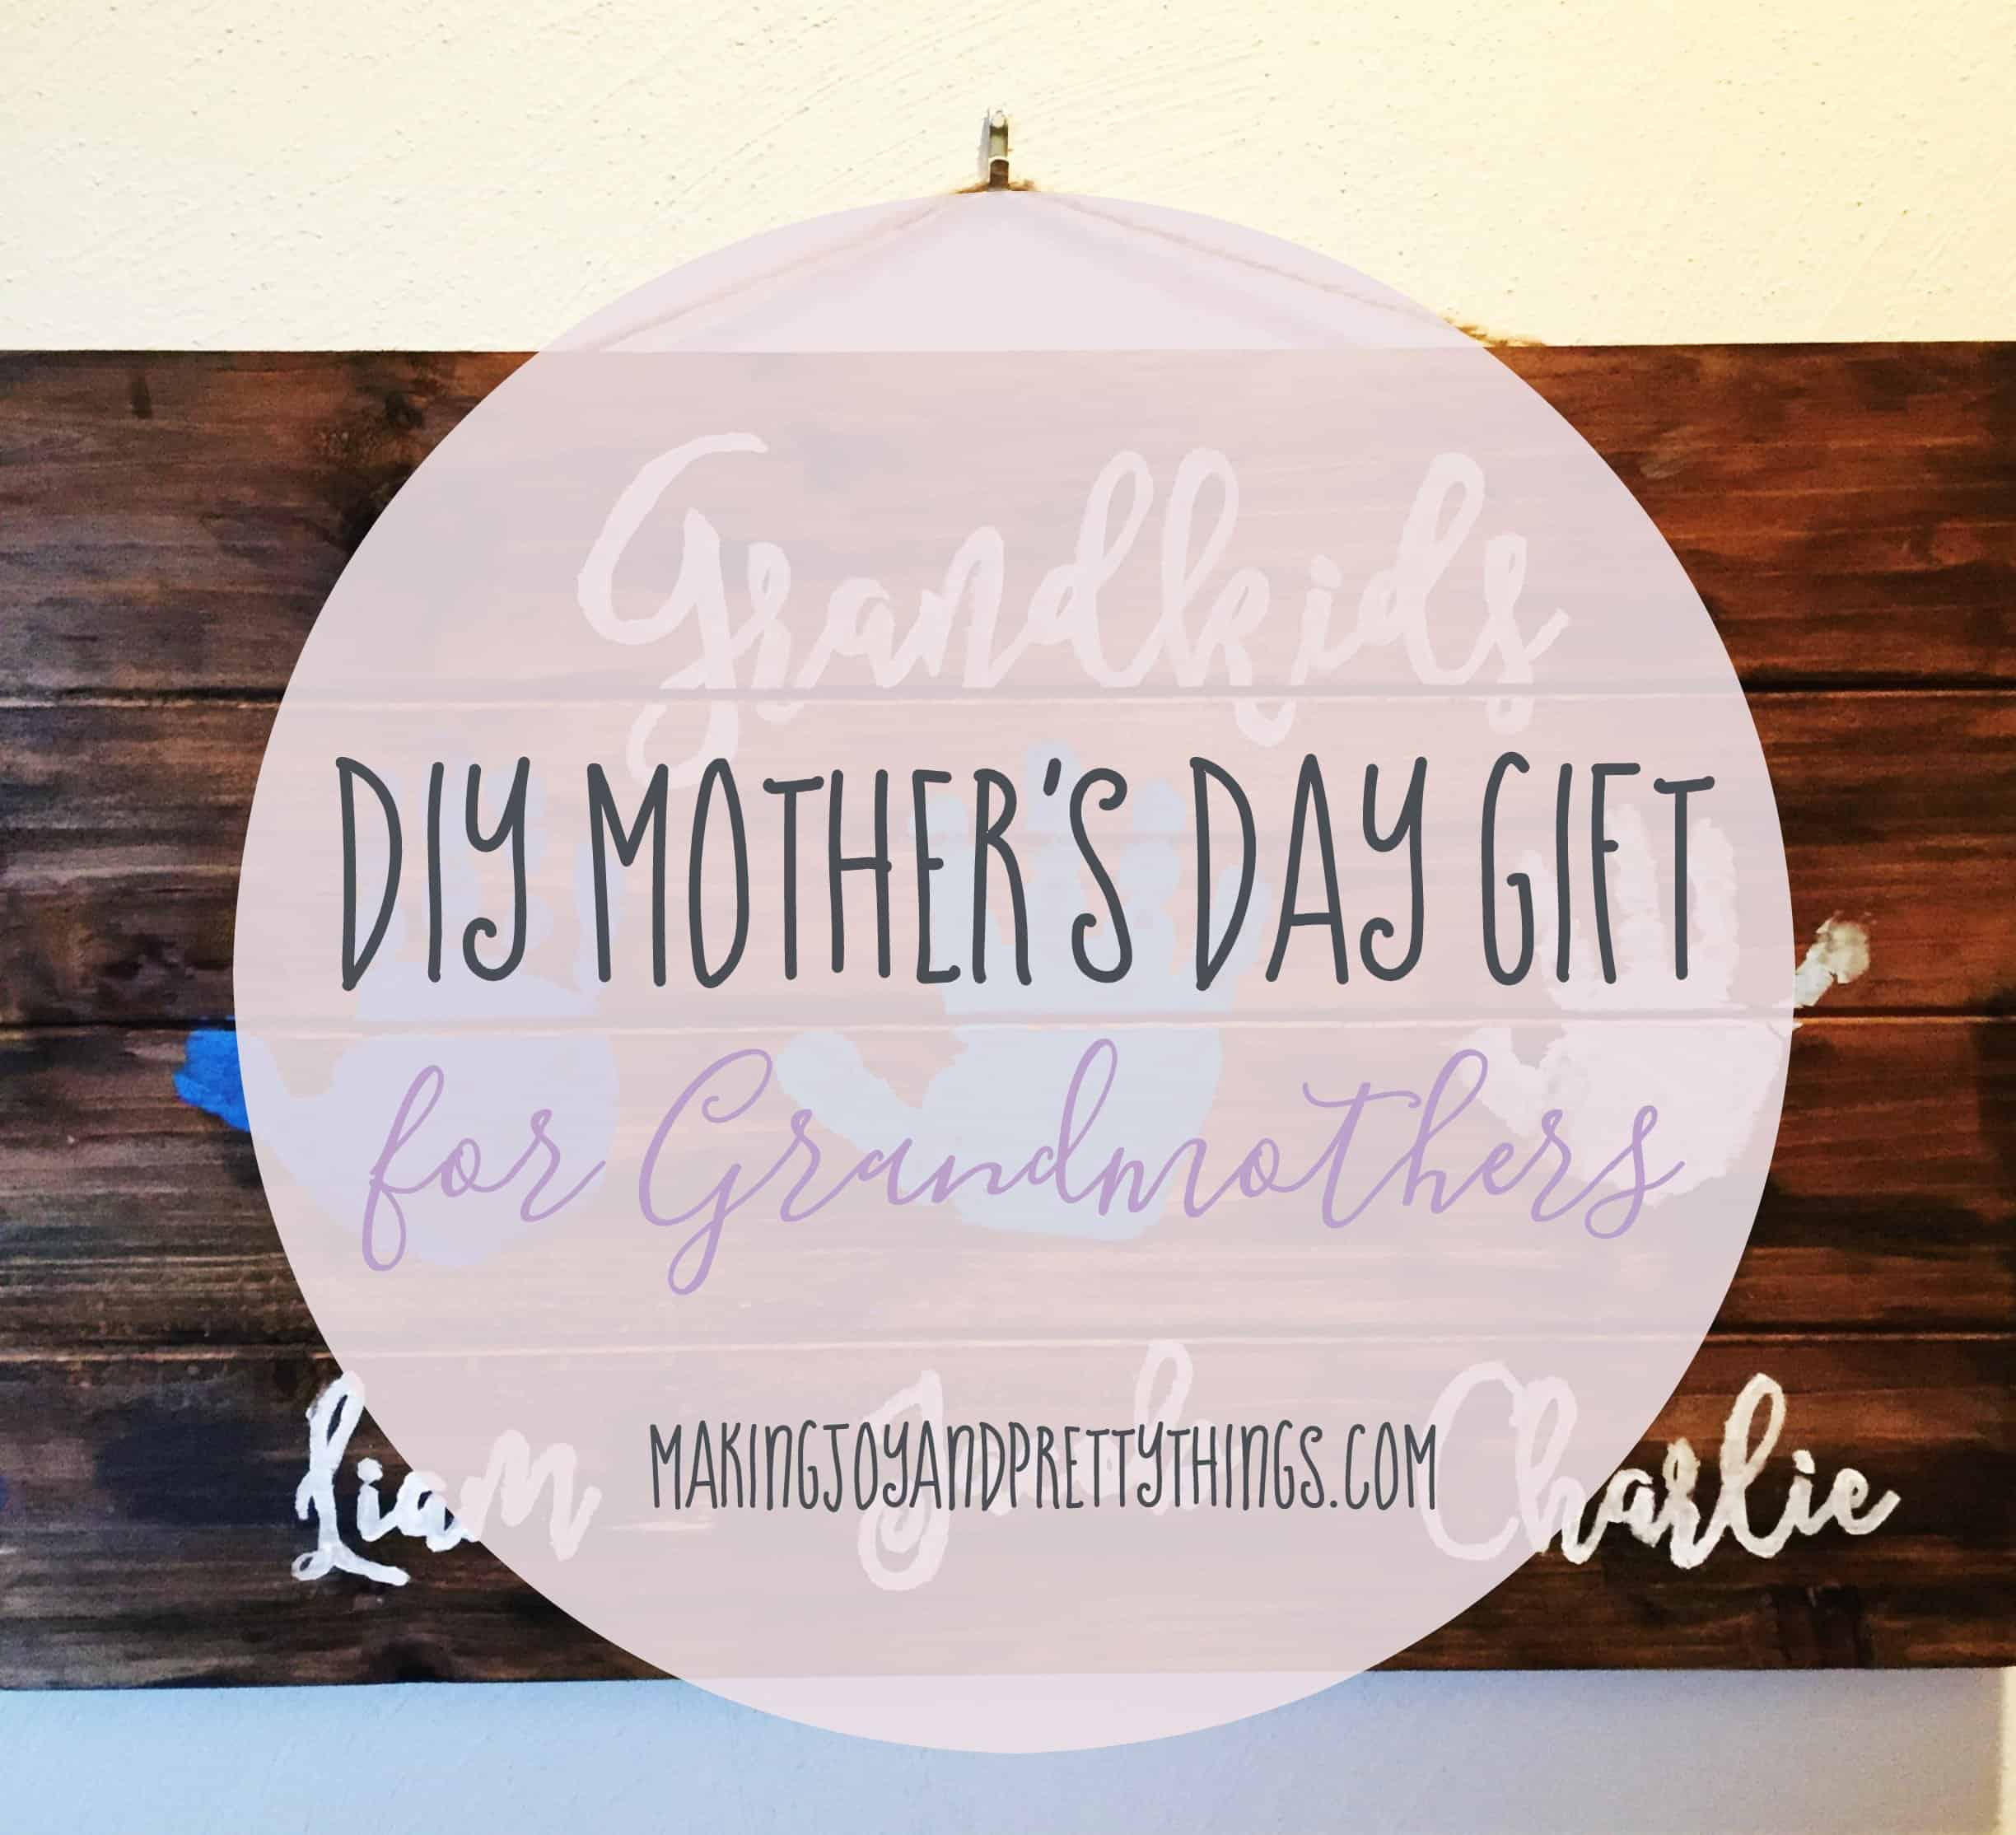 DIY Mother's Day Gift for Grandmothers and great tutorial to DIY a handprint gift for grandma